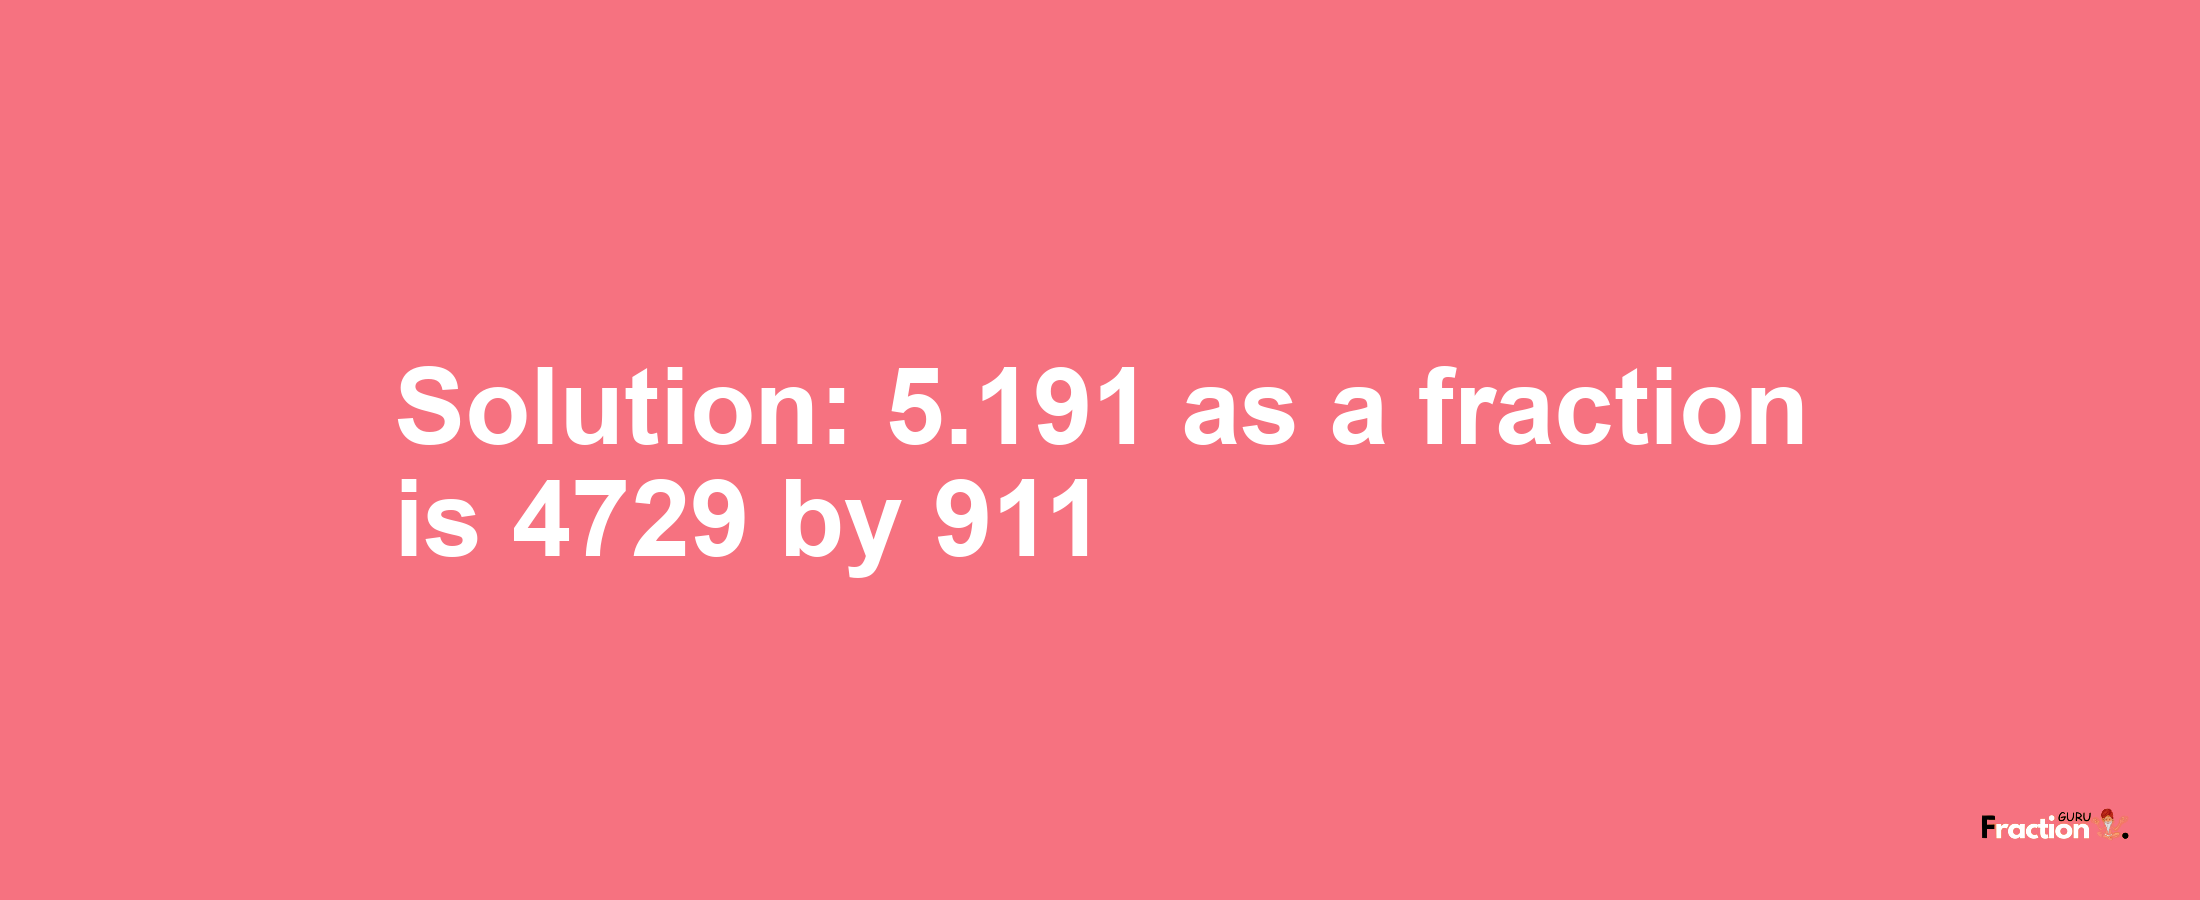 Solution:5.191 as a fraction is 4729/911